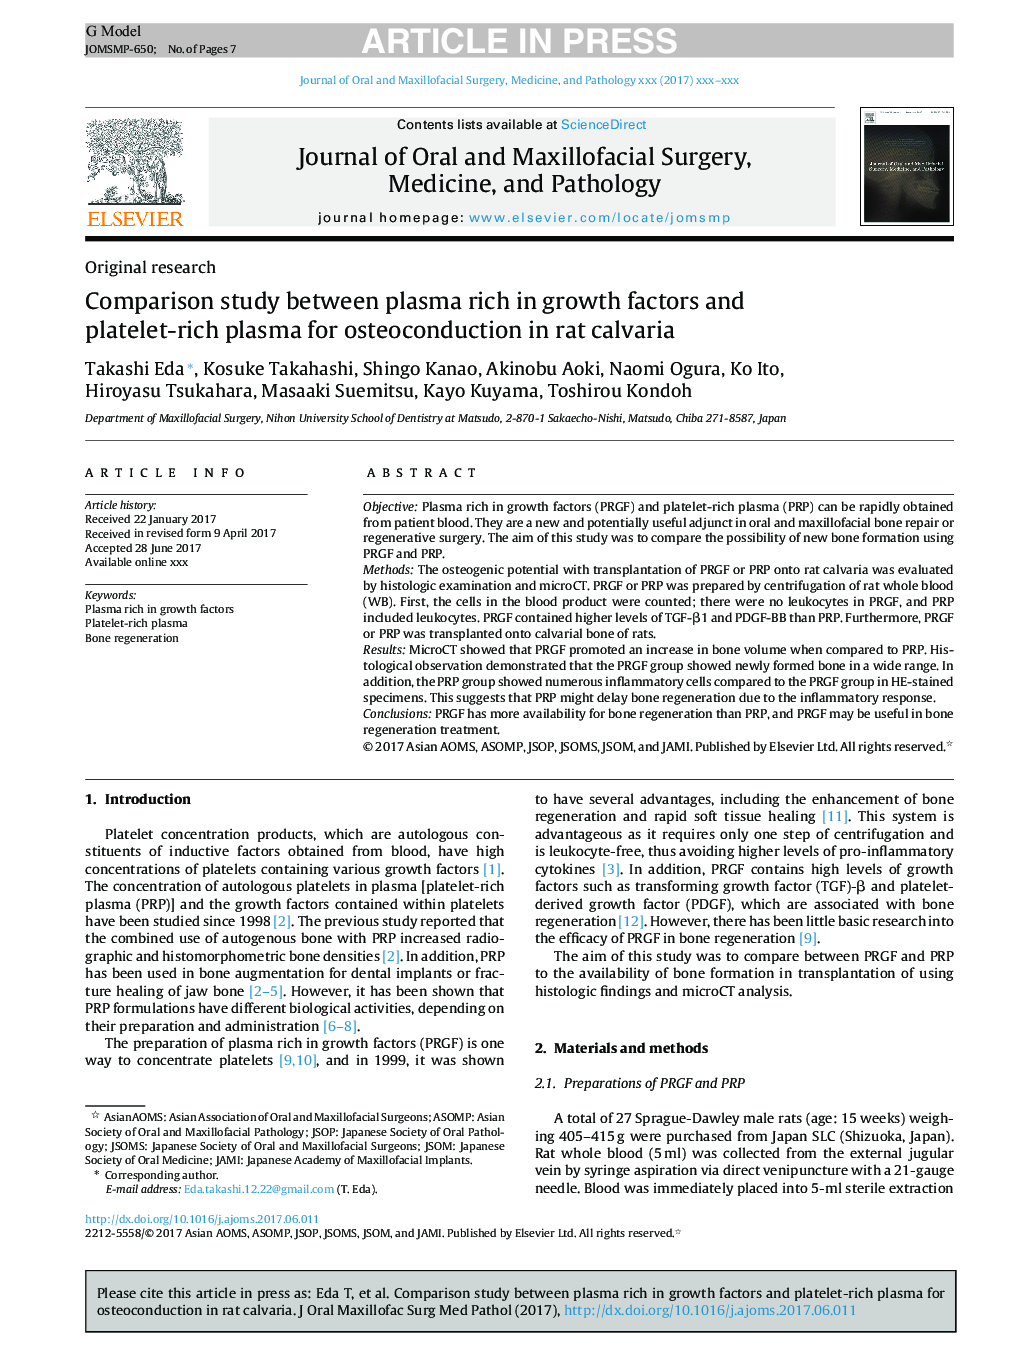 Comparison study between plasma rich in growth factors and platelet-rich plasma for osteoconduction in rat calvaria